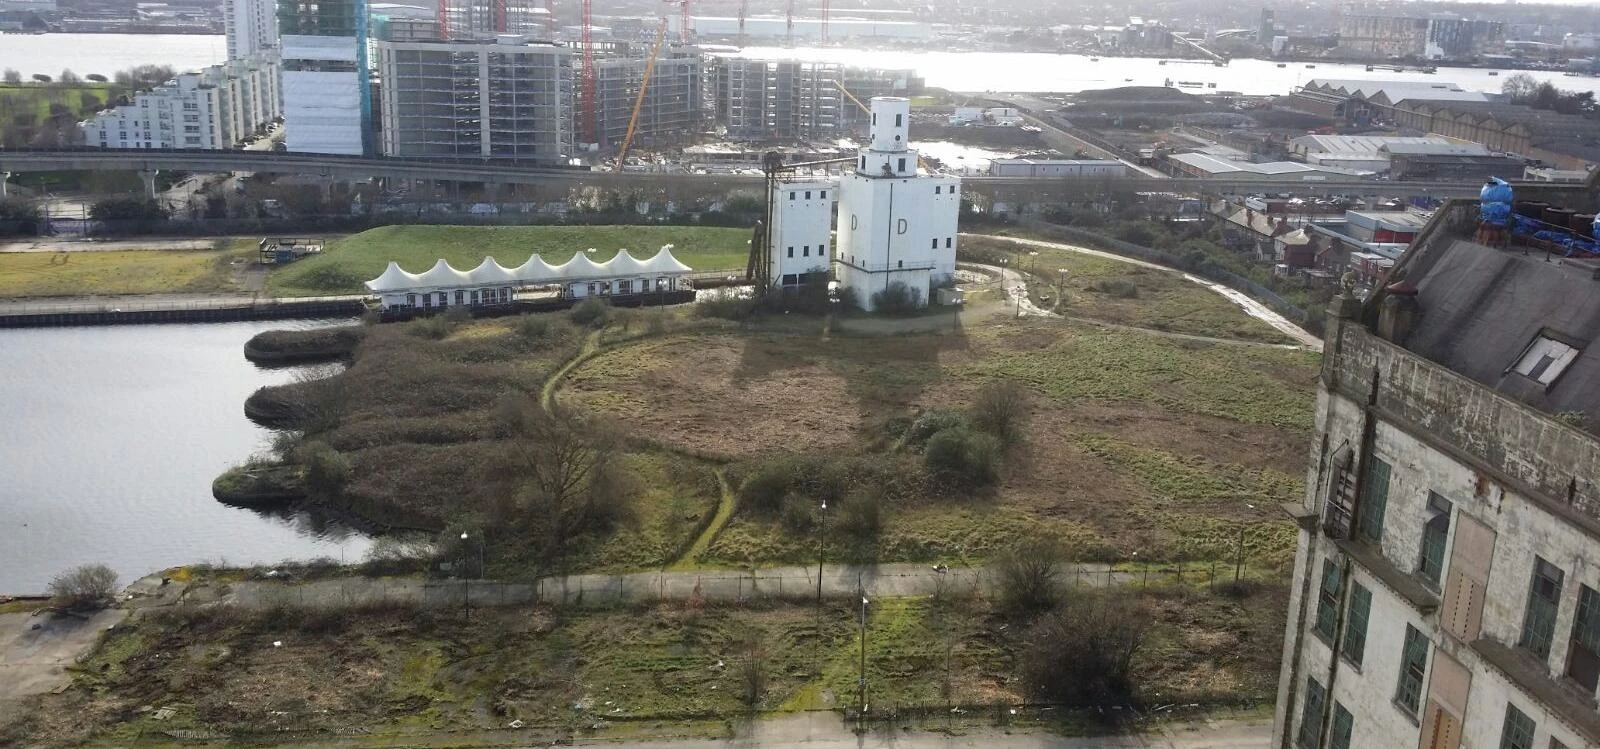 Thomson Habitats is working to protect wildlife during the development of the Silvertown project in 